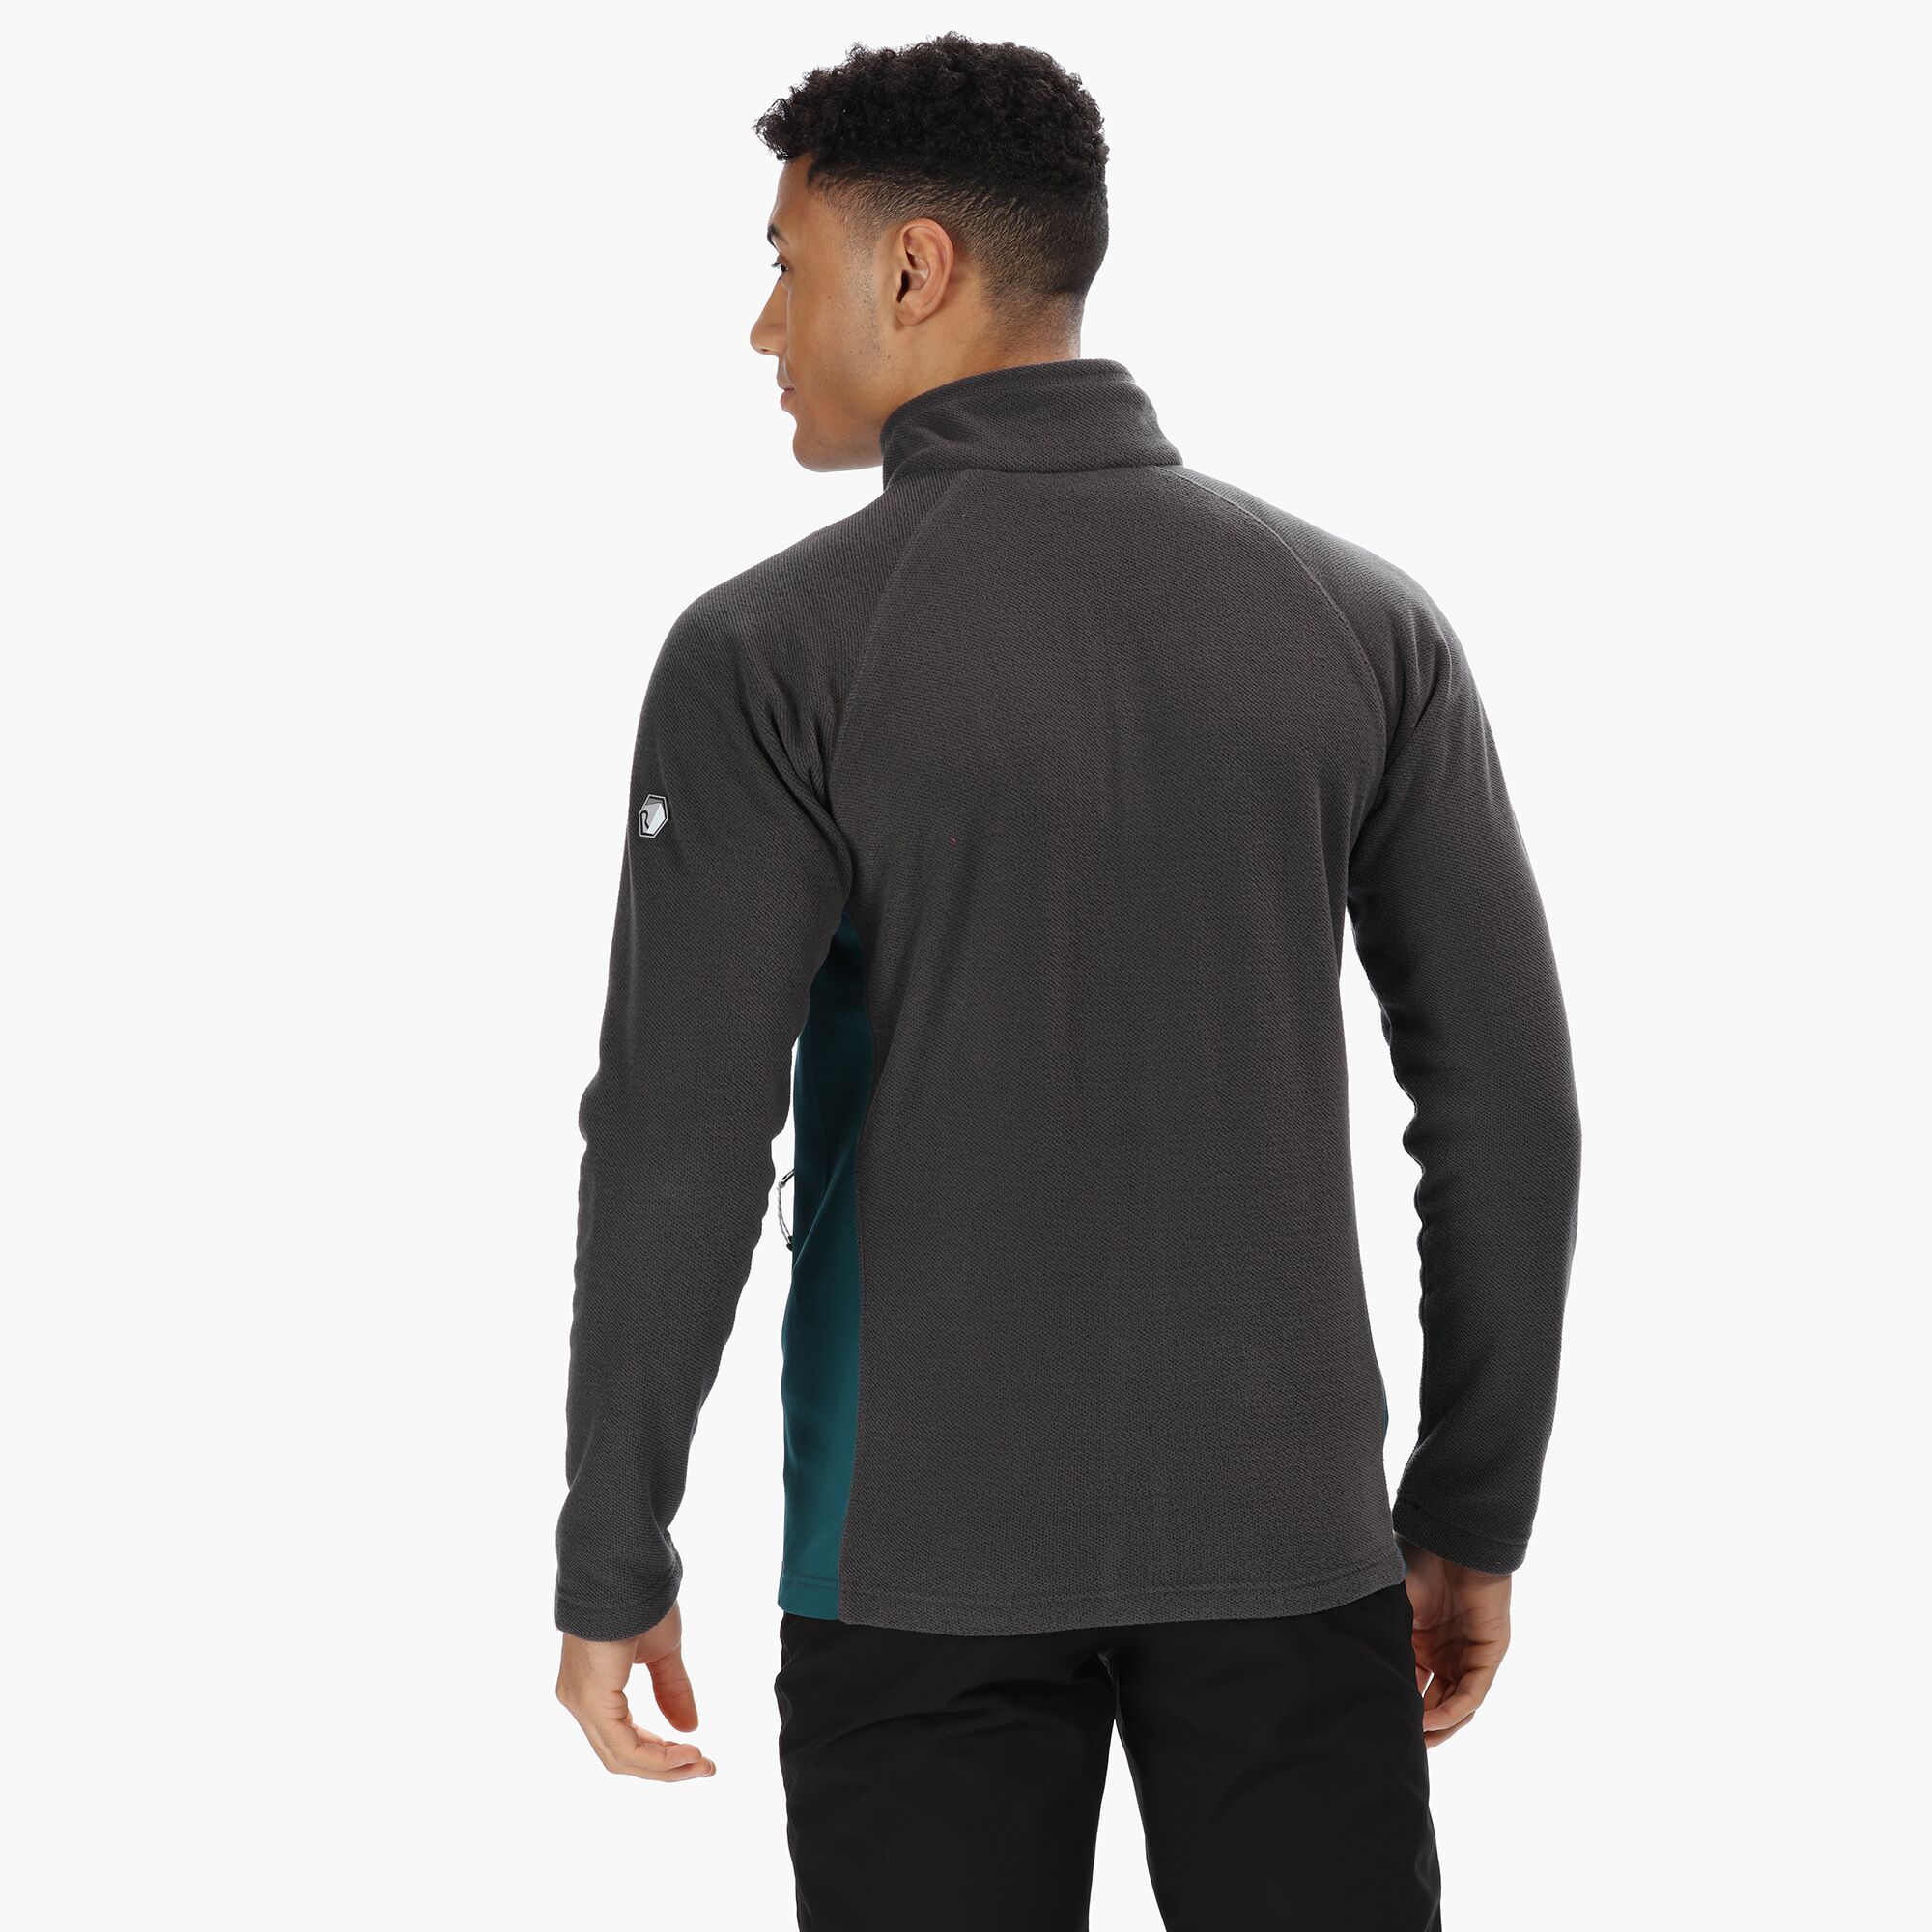 100% polyester. Made from honeycomb of 225gsm fleece fabric with quick drying EXTOL panels and a raglan sleeve design to sit smoothly under rucksacks. 2 zipped side pockets.